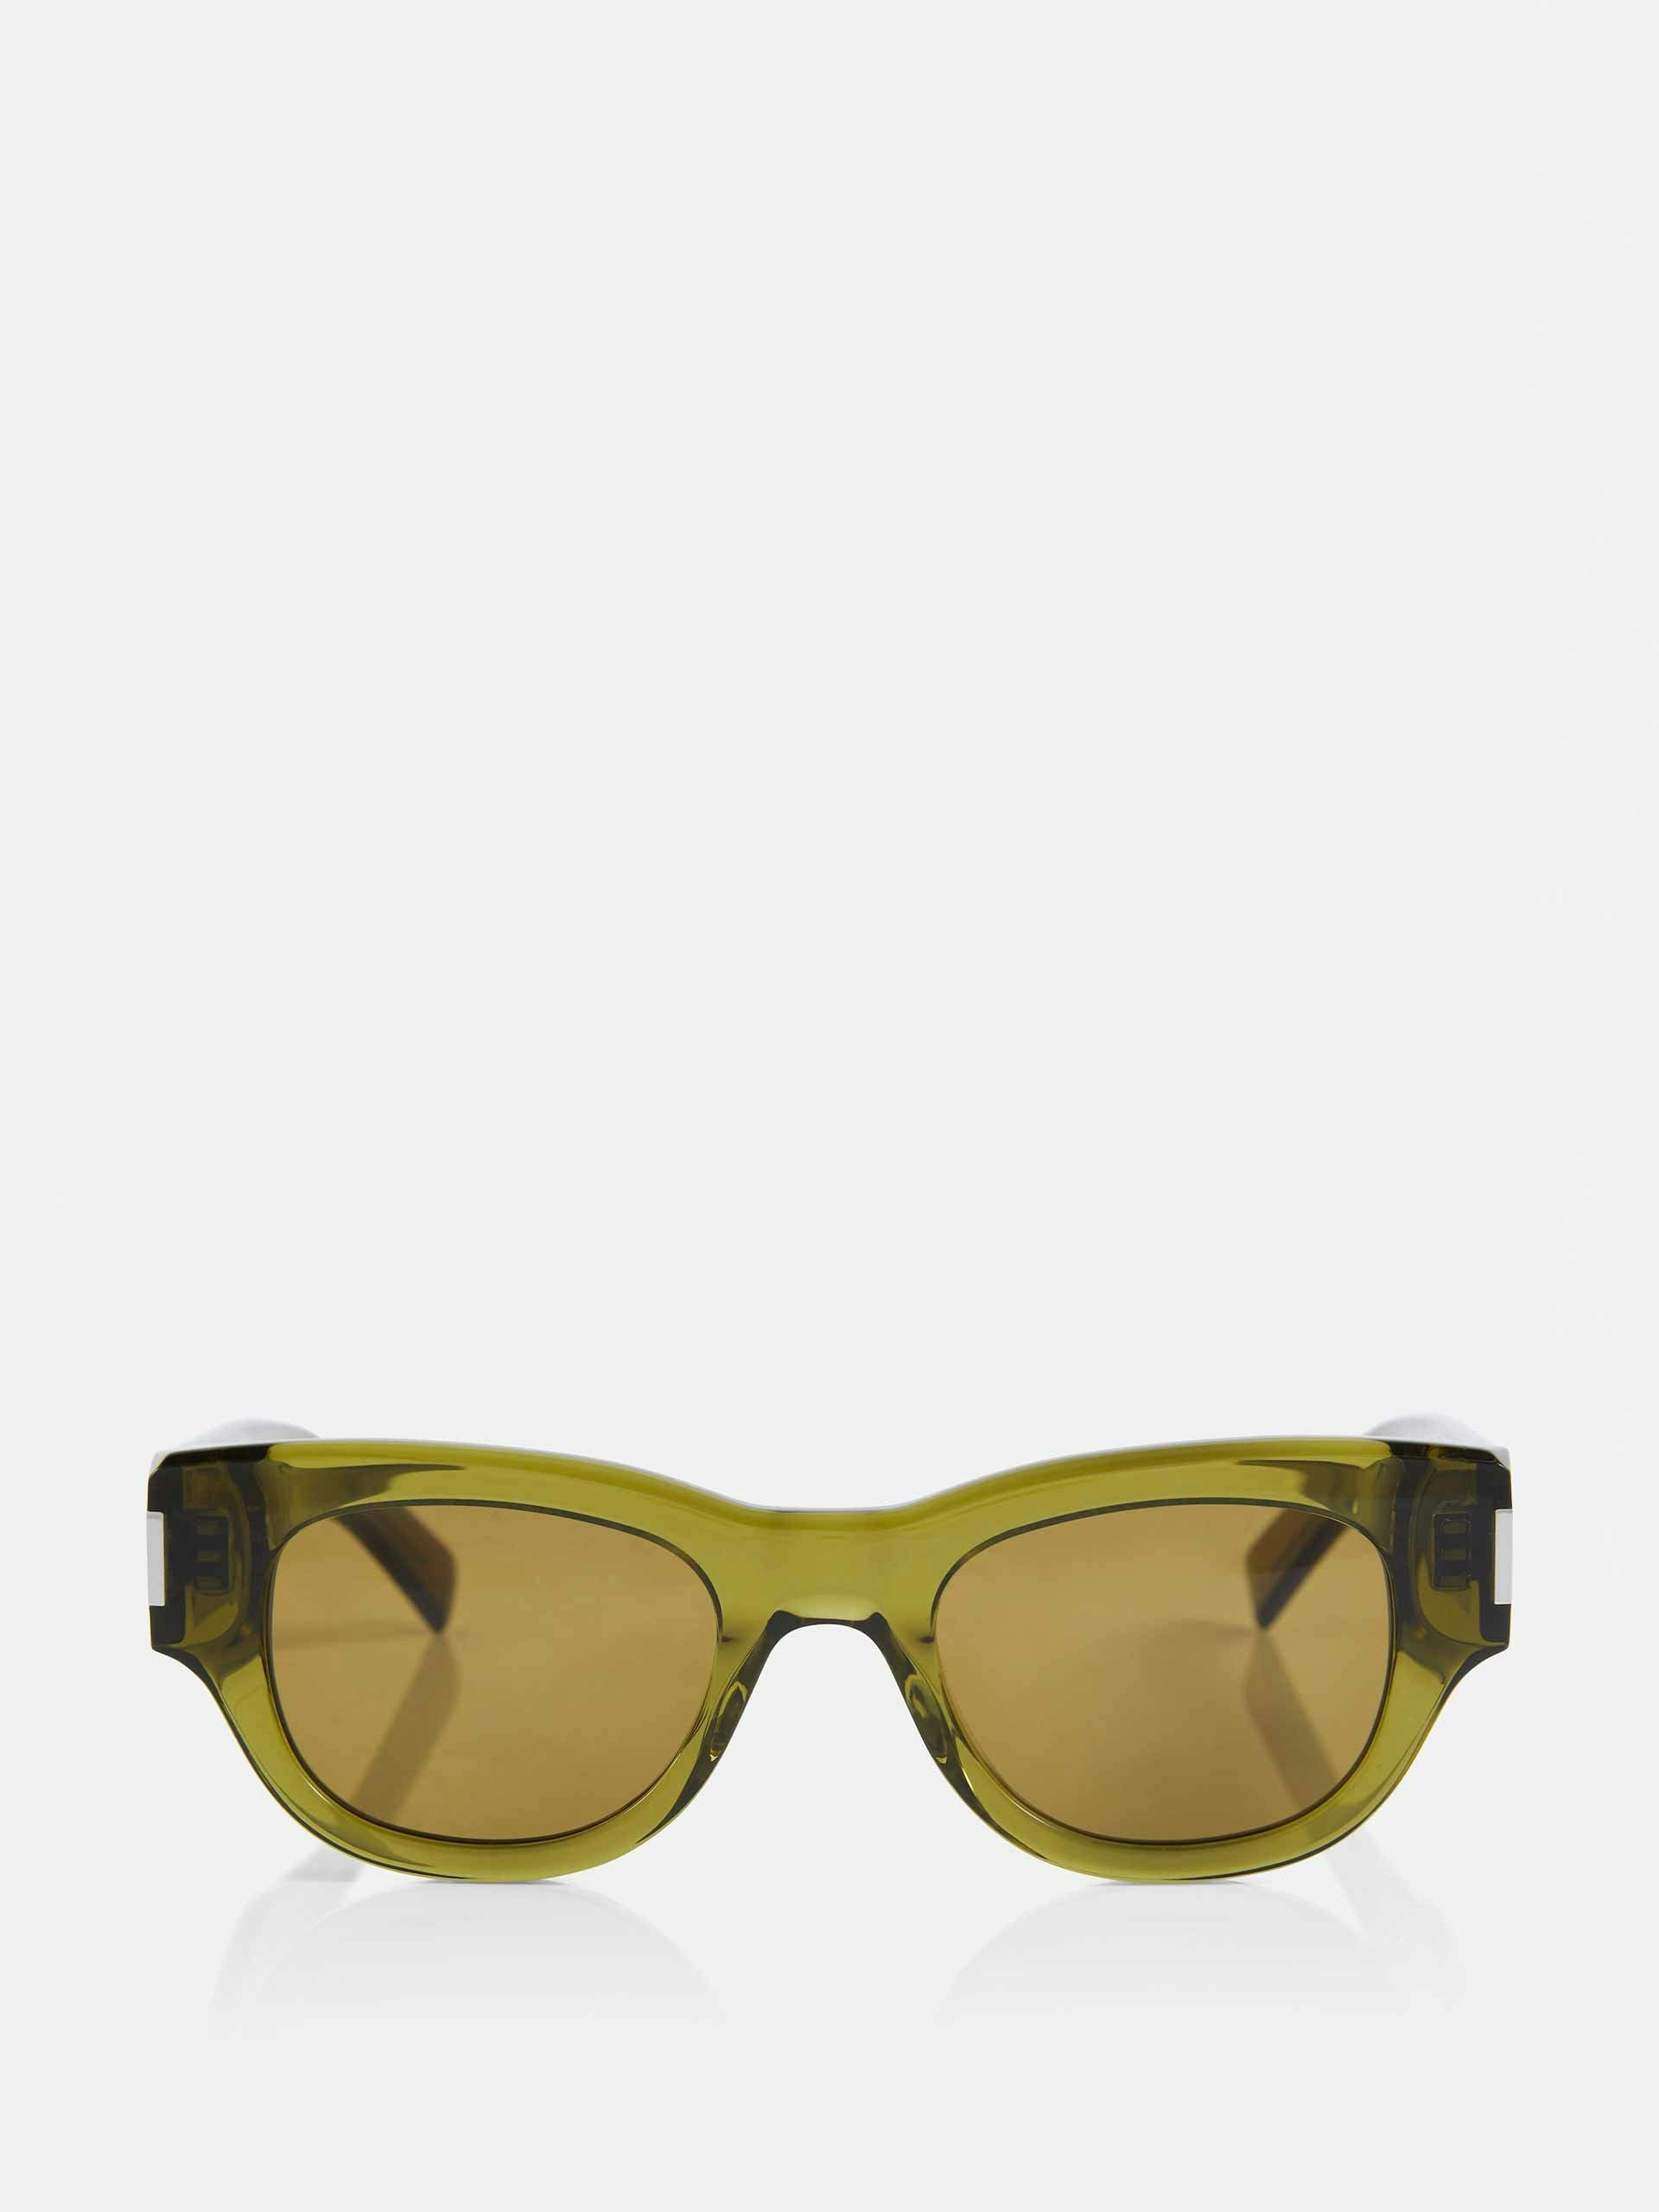 Green acetate rounded sunglasses